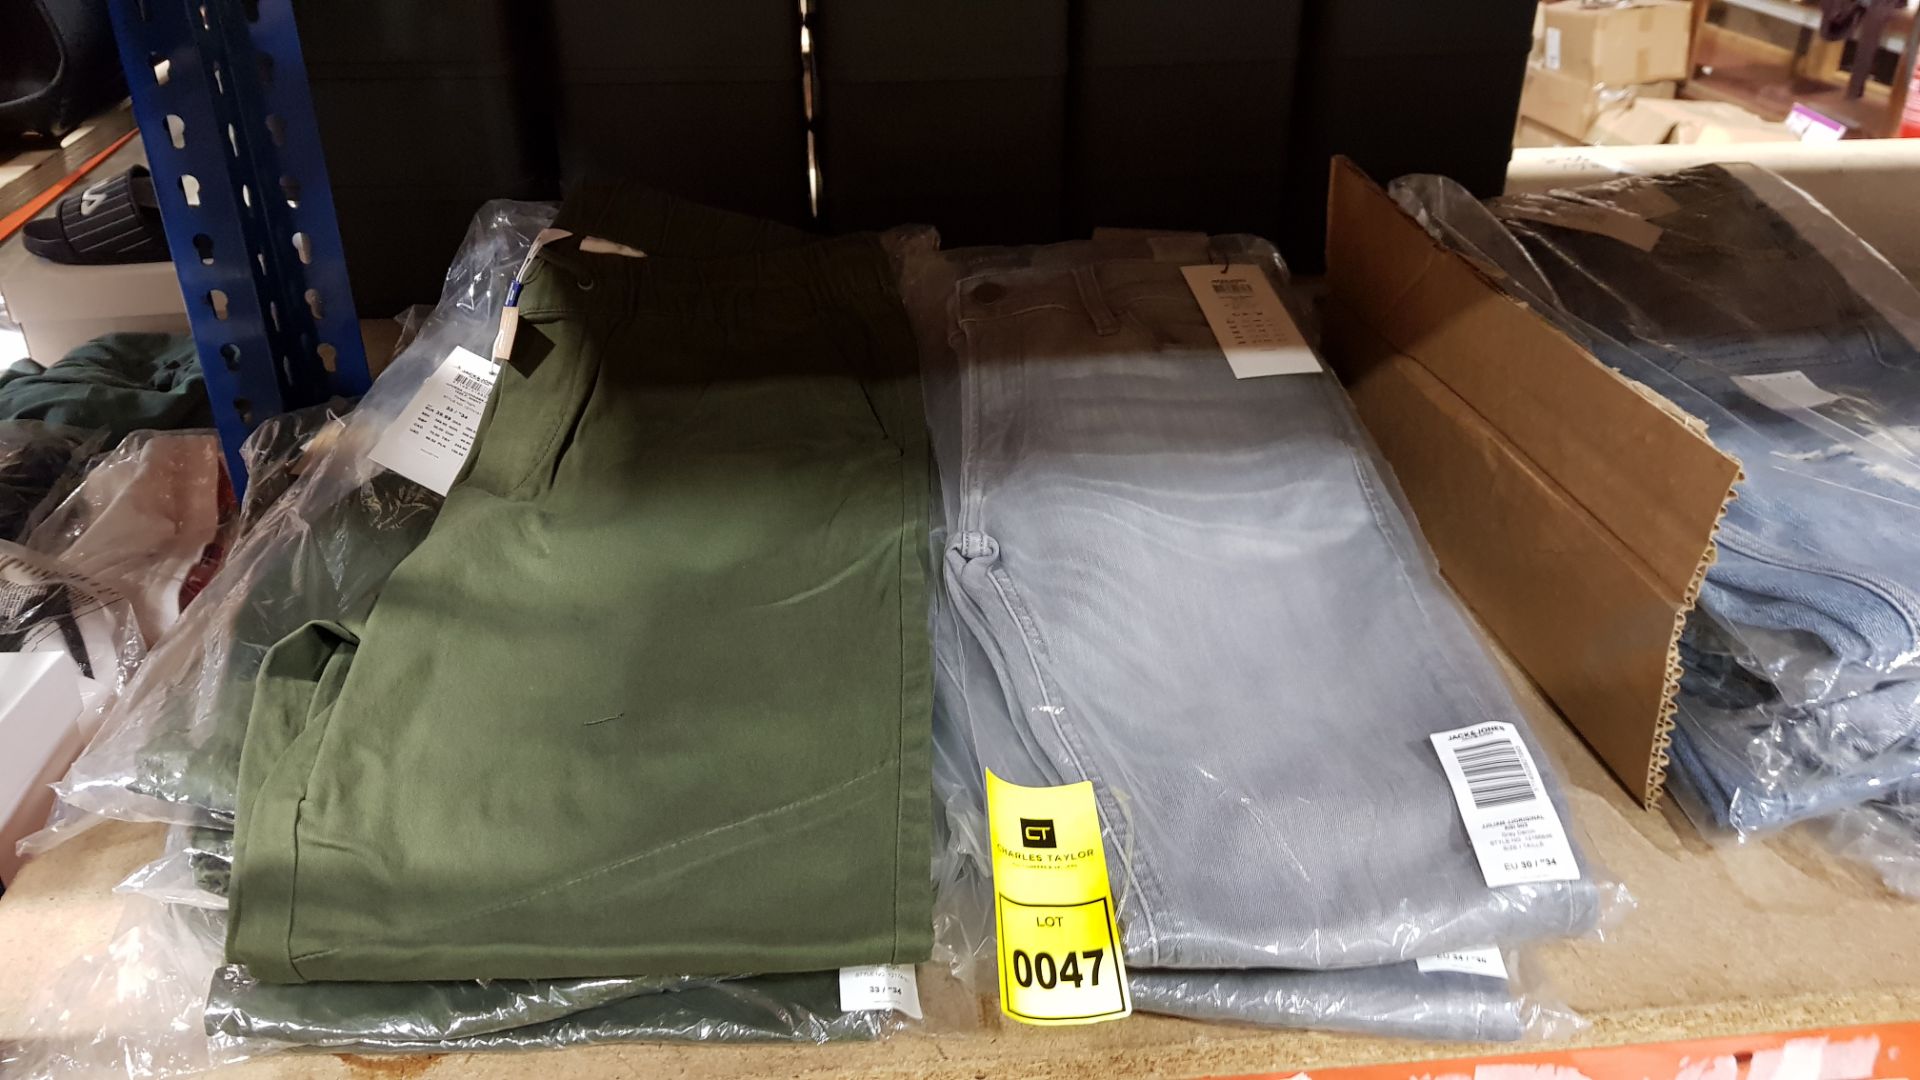 6 X BRAND NEW JACK & JONES FOREST NGHT JOGGERS EU 33/ "34 TOTAL RRP £180.00 AND 5 X BRAND NEW JACK &